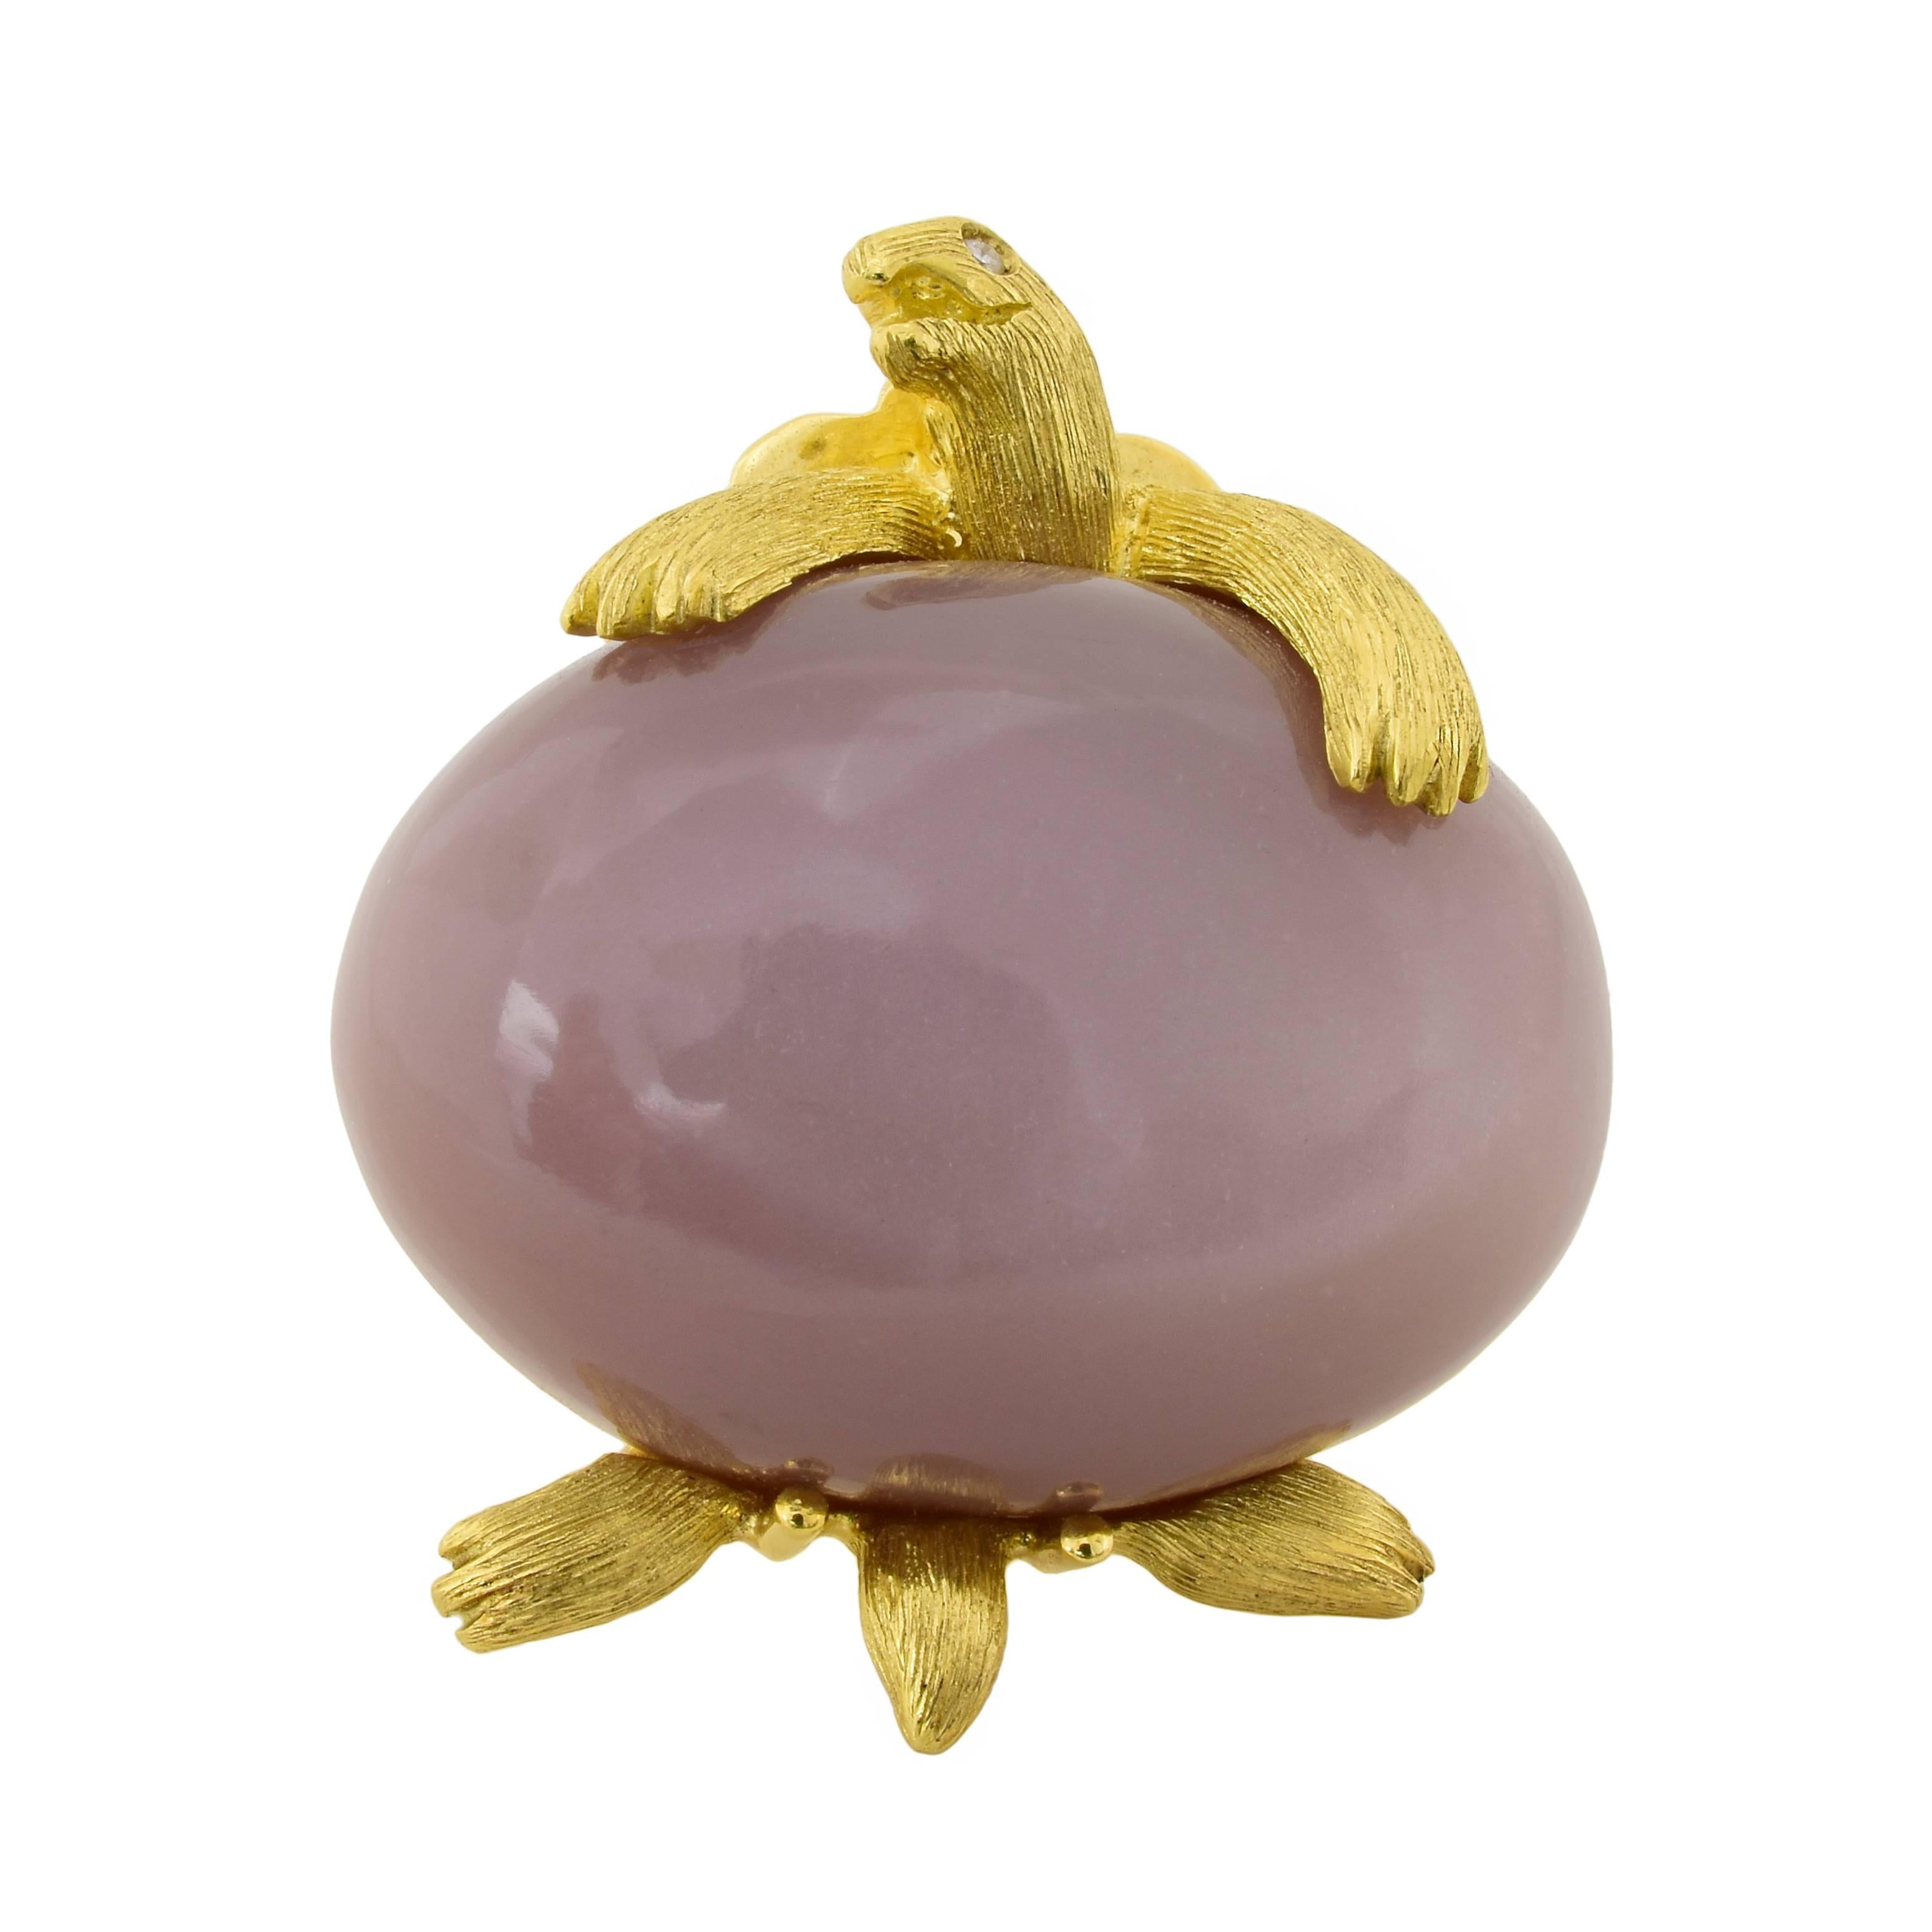 Dunay turtle brooch in 18k yellow gold, featuring a 55.89 carat pink moonstone, which gives off a metallic sheen when reflecting light. The animated face of the turtle has small diamonds for eyes and the texture of his body features Henry Dunay's